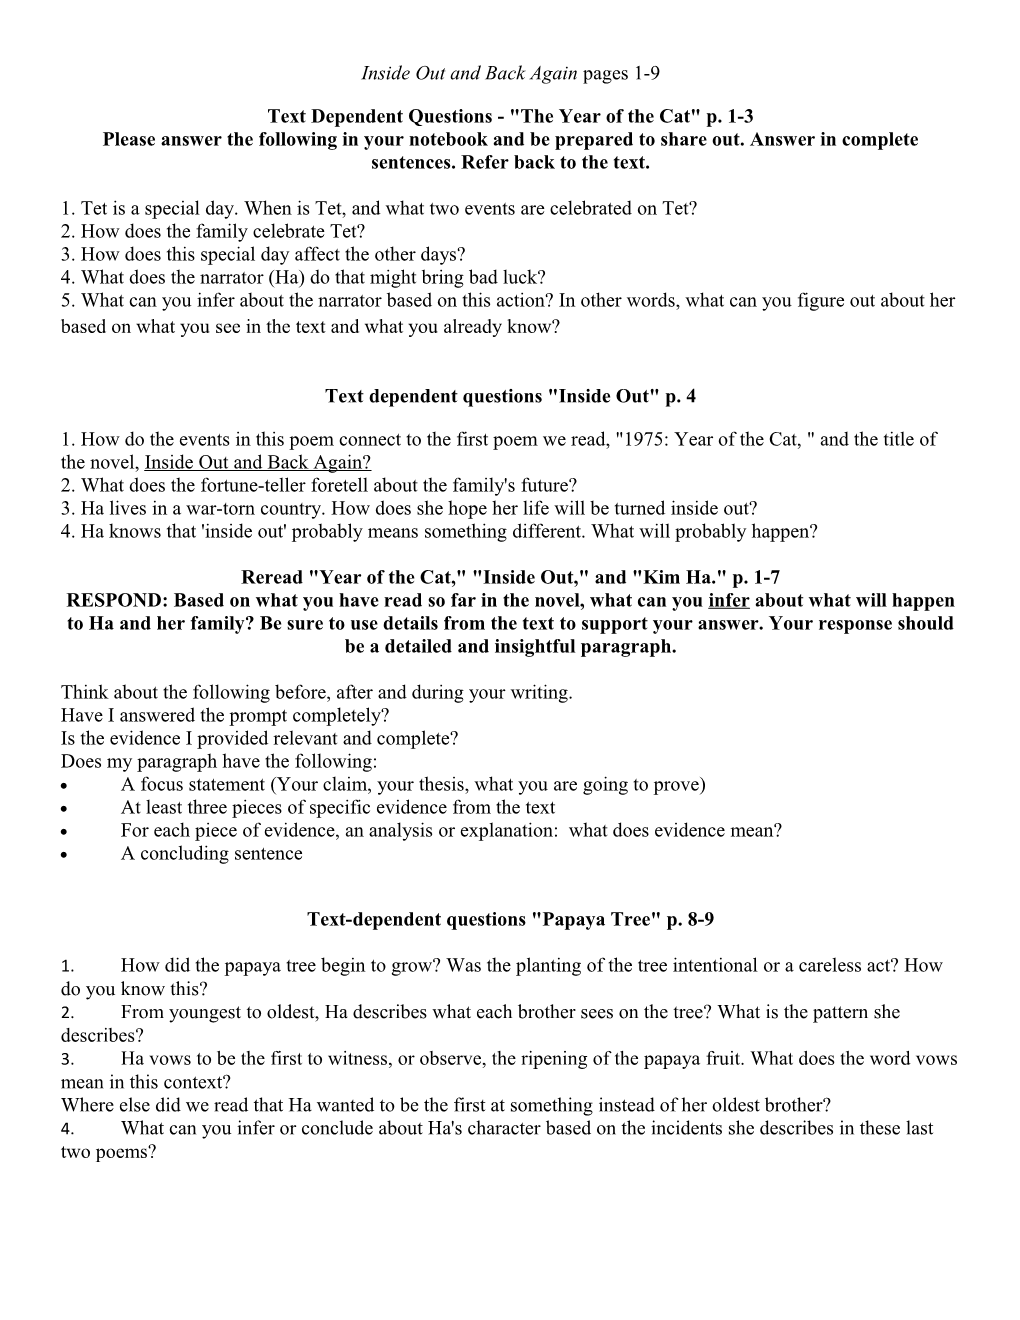 Text Dependent Questions - the Year of the Cat P. 1-3